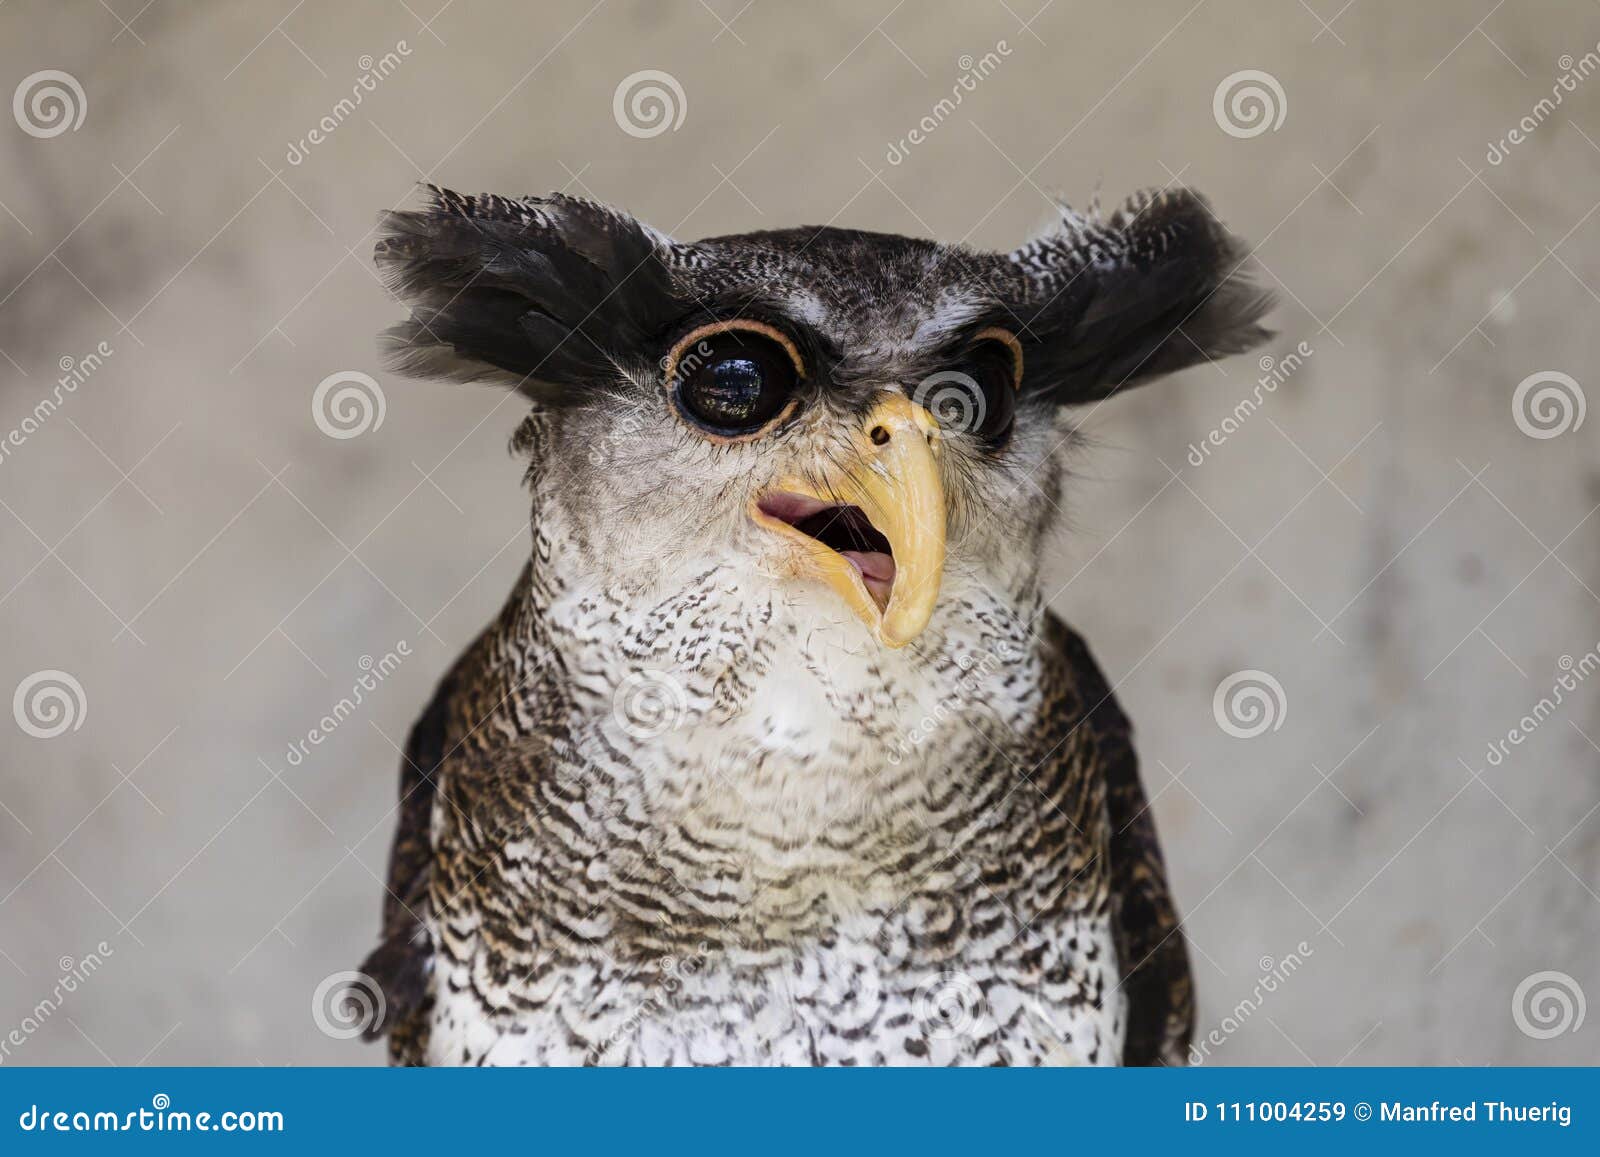 close-up of an owl with a crazy and funny face expression